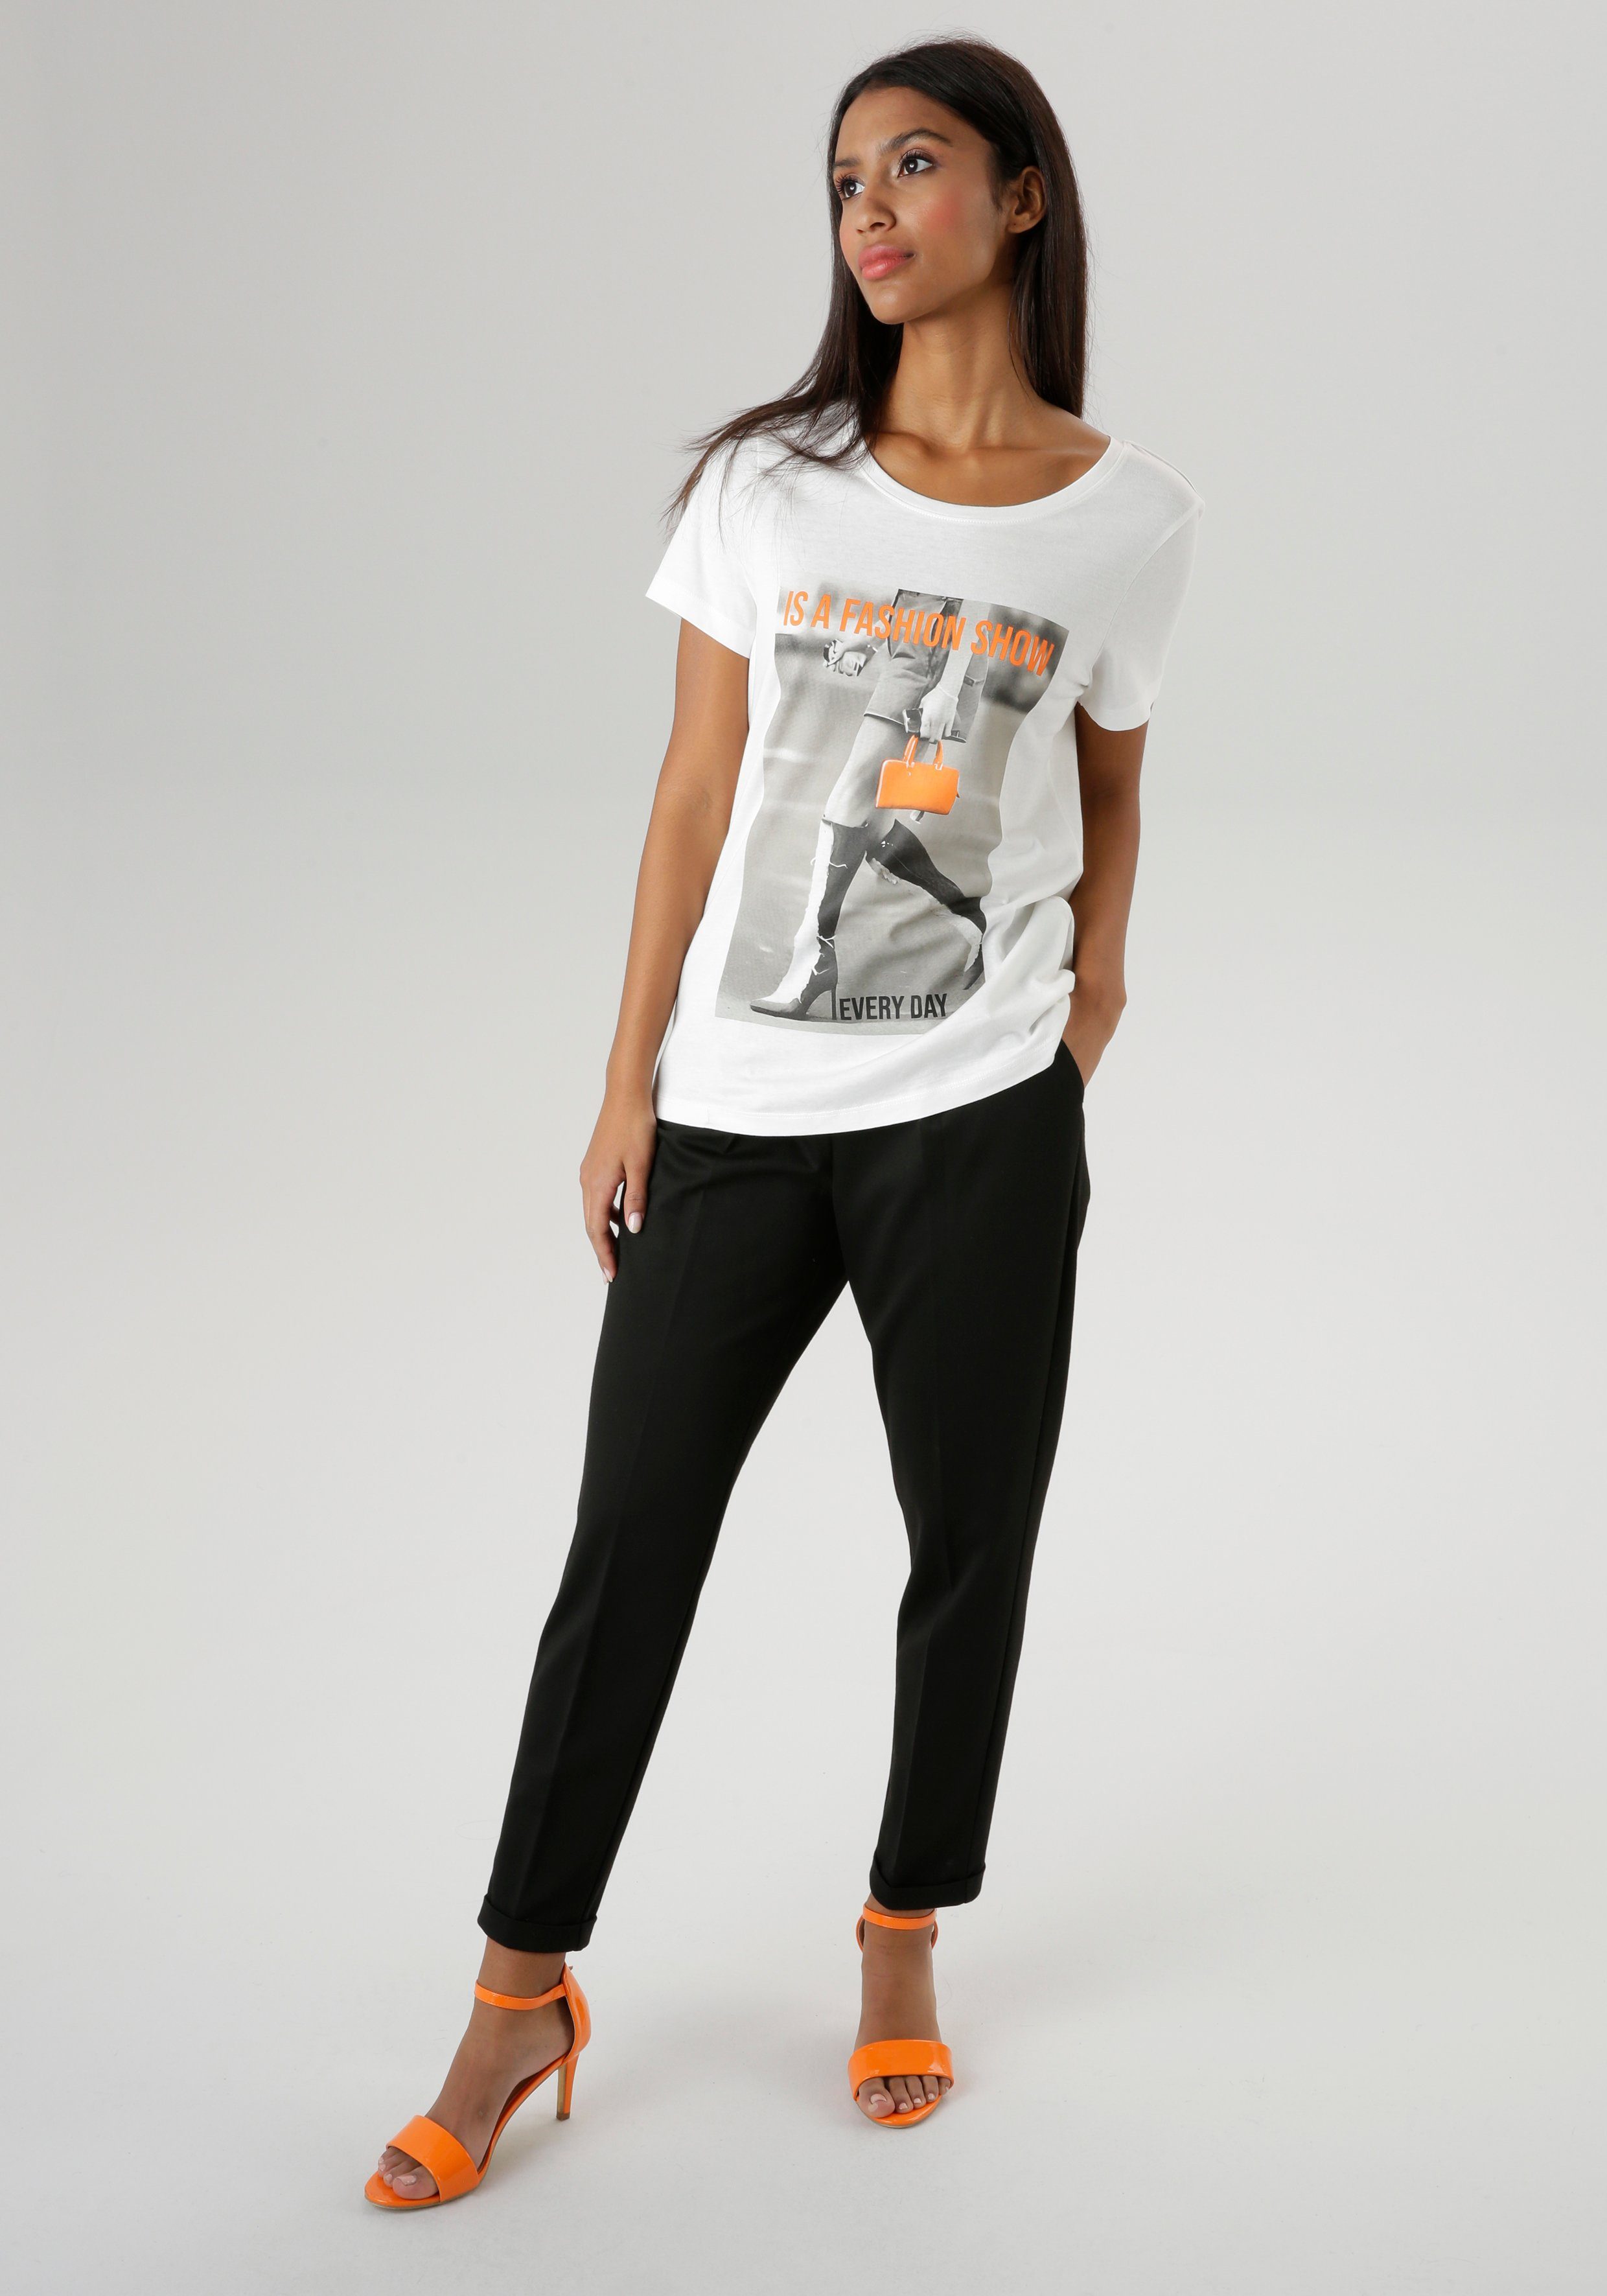 Aniston SELECTED T-shirt met modieuze print "every day is a fashion show" nieuwe collectie